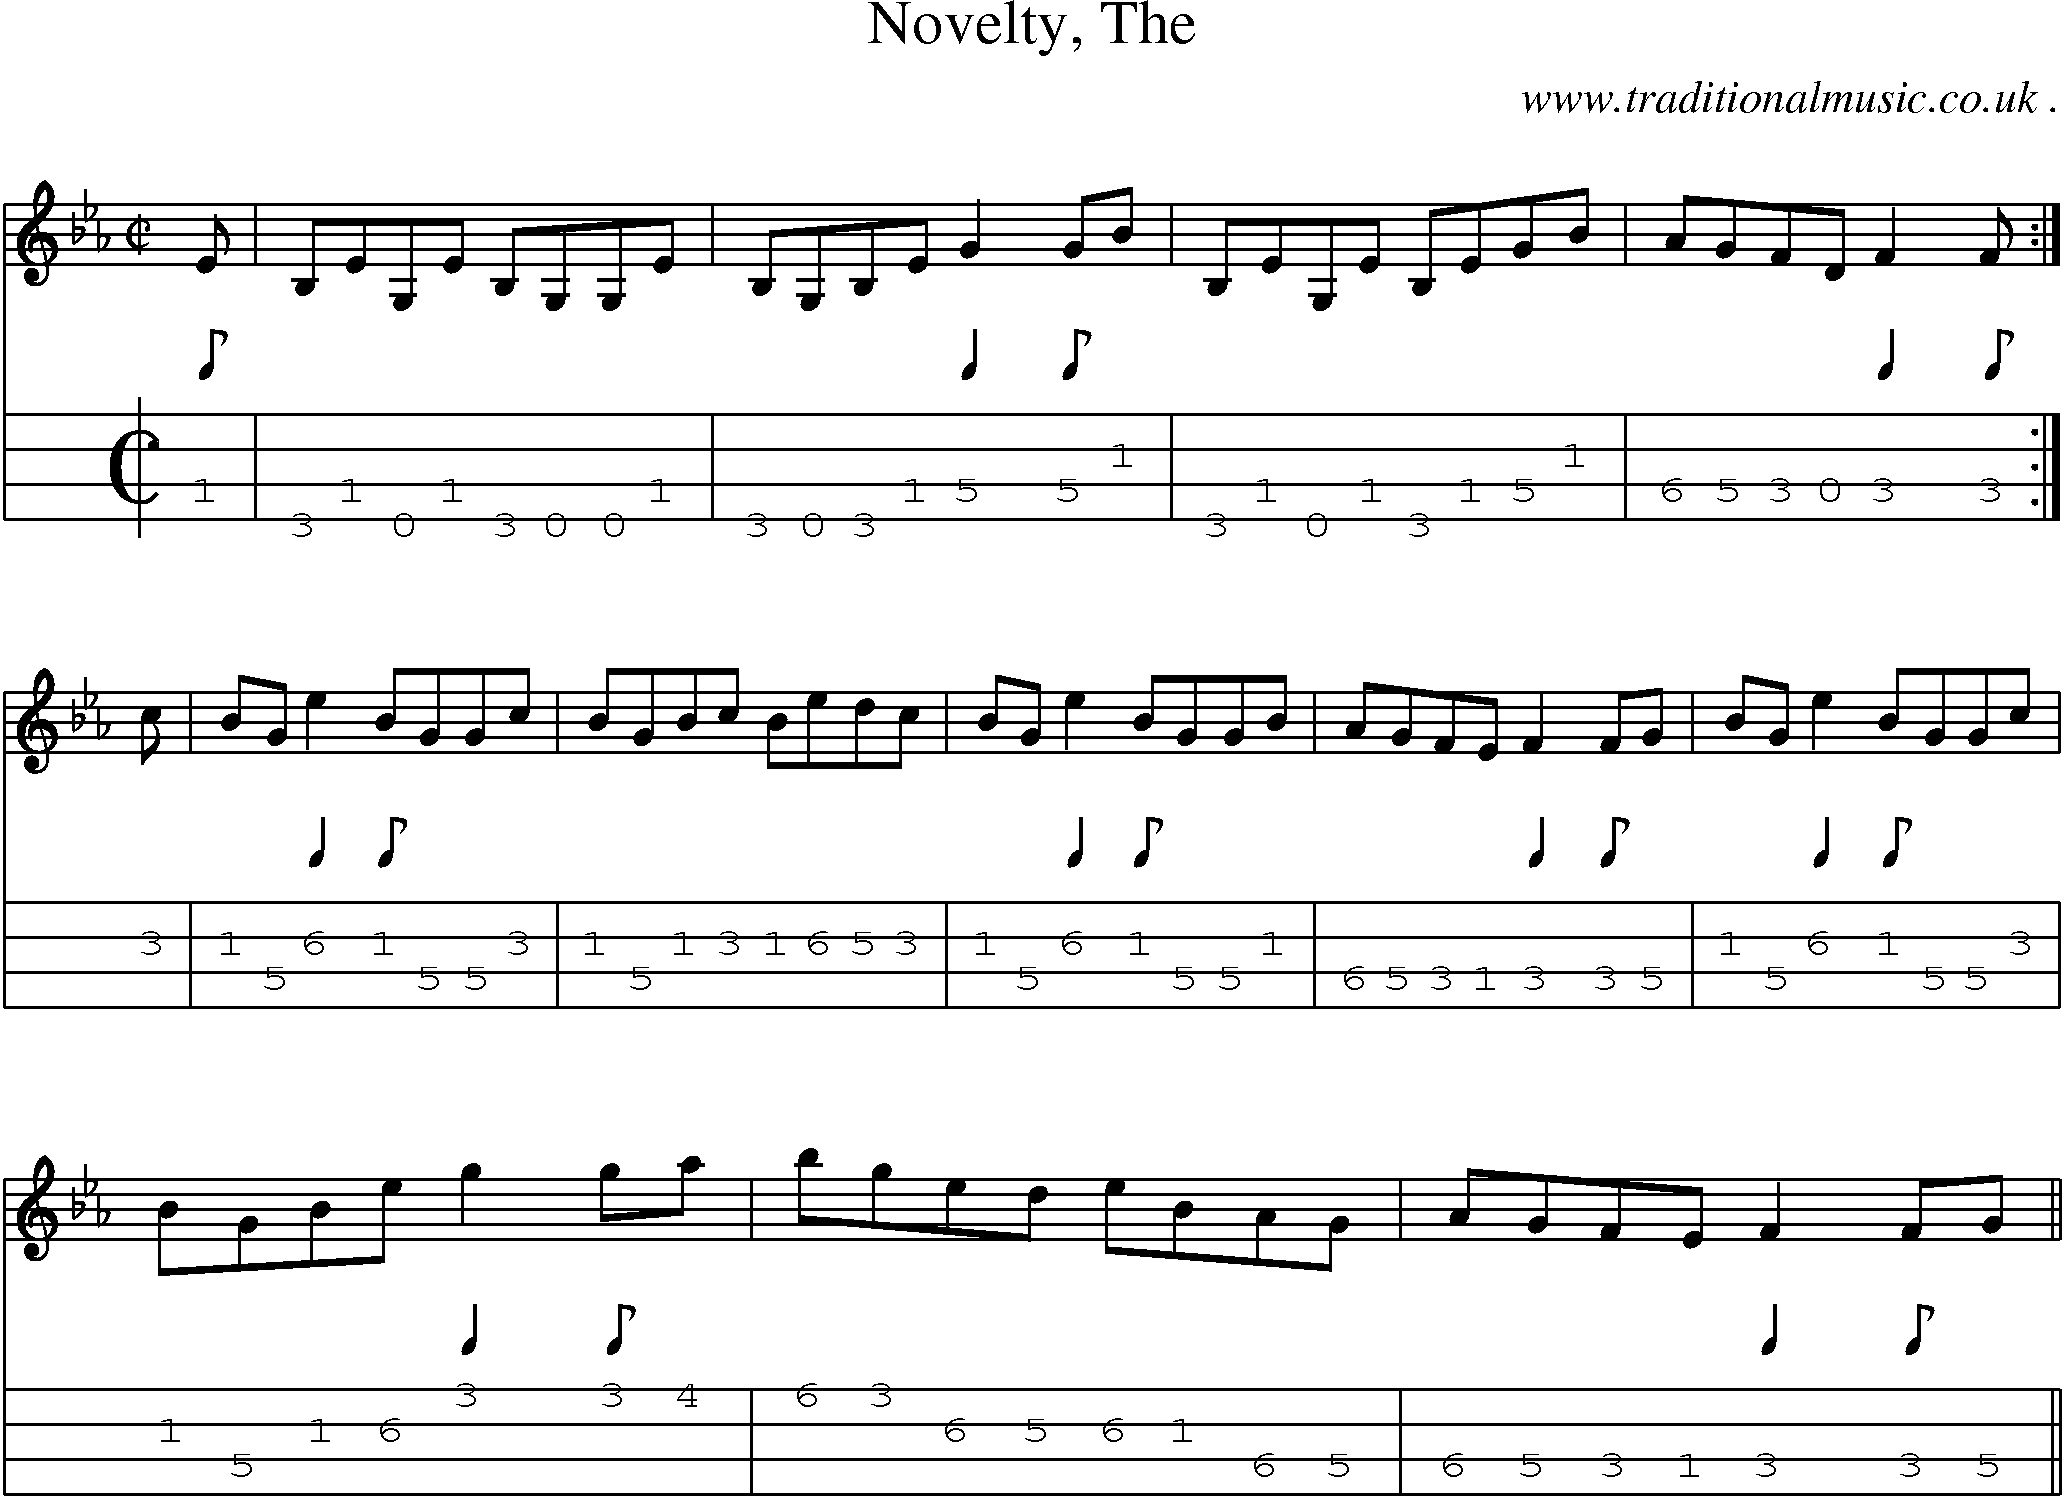 Sheet-music  score, Chords and Mandolin Tabs for Novelty The